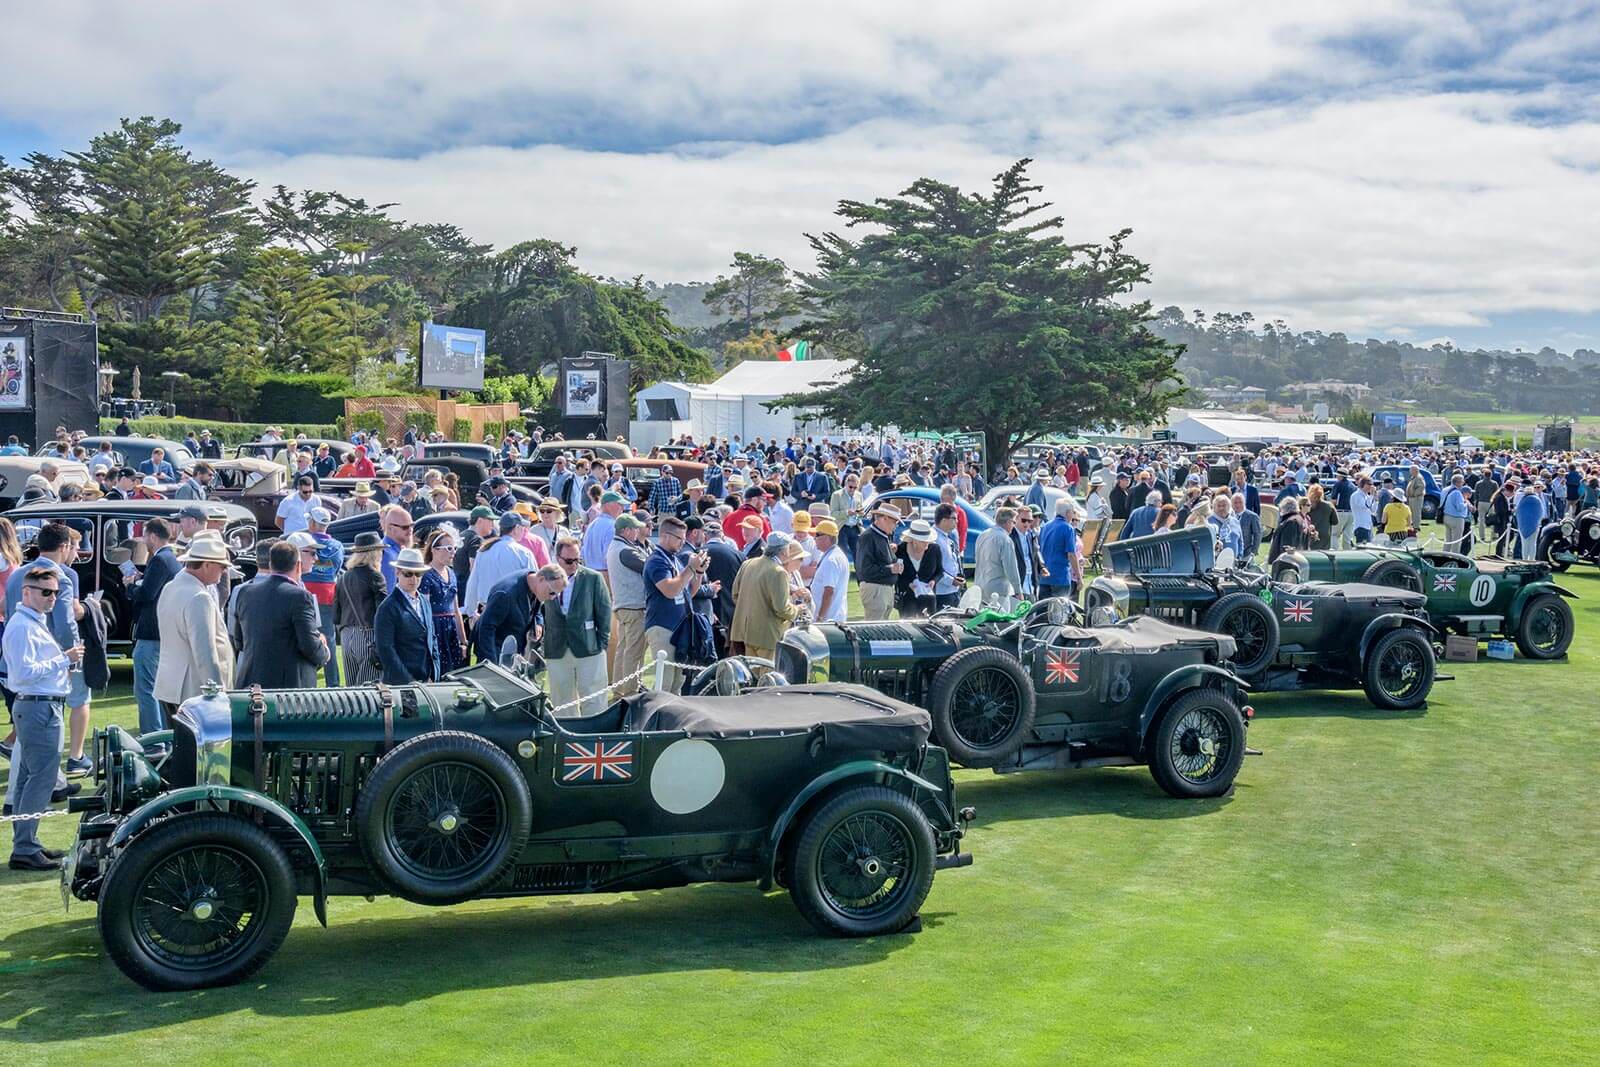 How to buy tickets for the Pebble Beach Concours d'Elegance